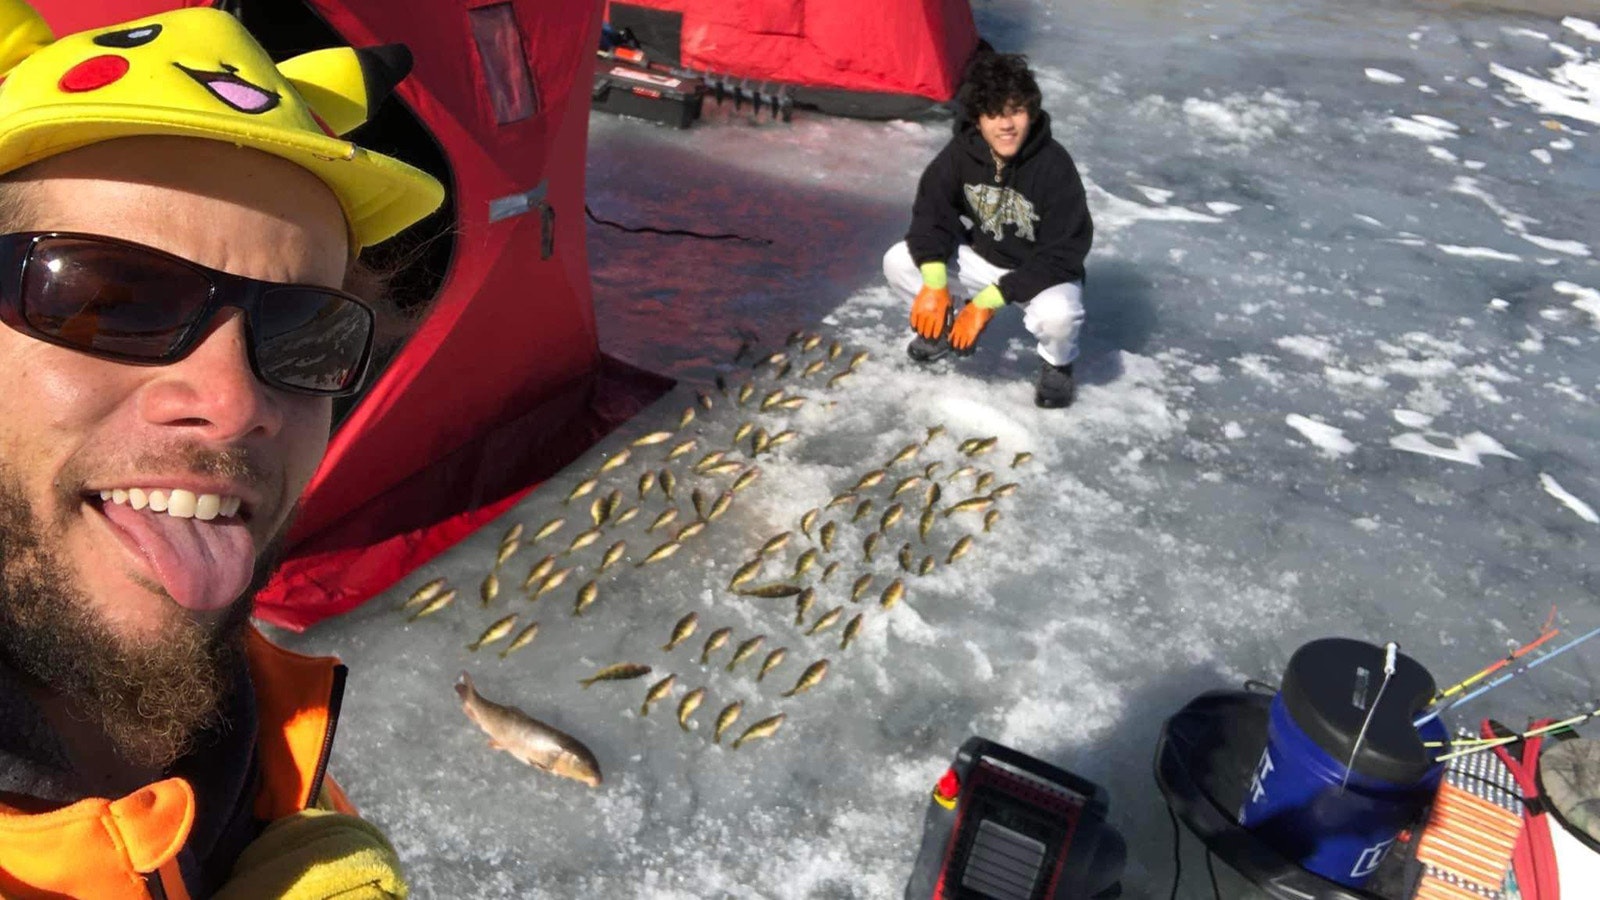 Angel Smith, also known as Everyday Pikachu Hat Fisherman, shares his love of ice fishing in Wyoming on his YouTube channel.